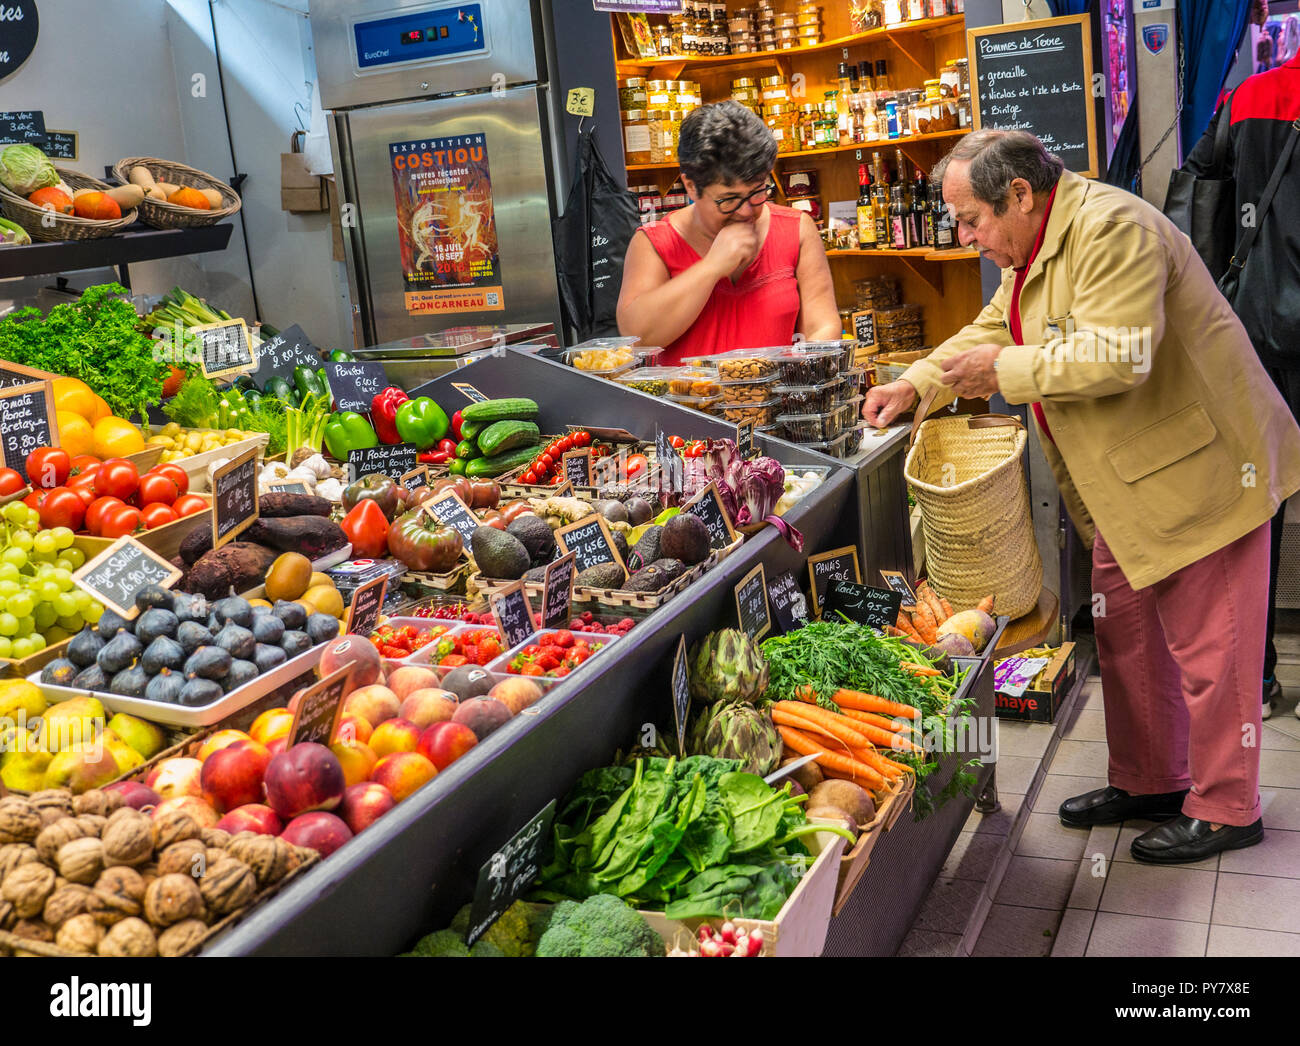 CONCARNEAU fruit & vegetable market stall with mature shopper counting & paying for produce in euros coins, Halles Market Concarneau Brittany France Stock Photo